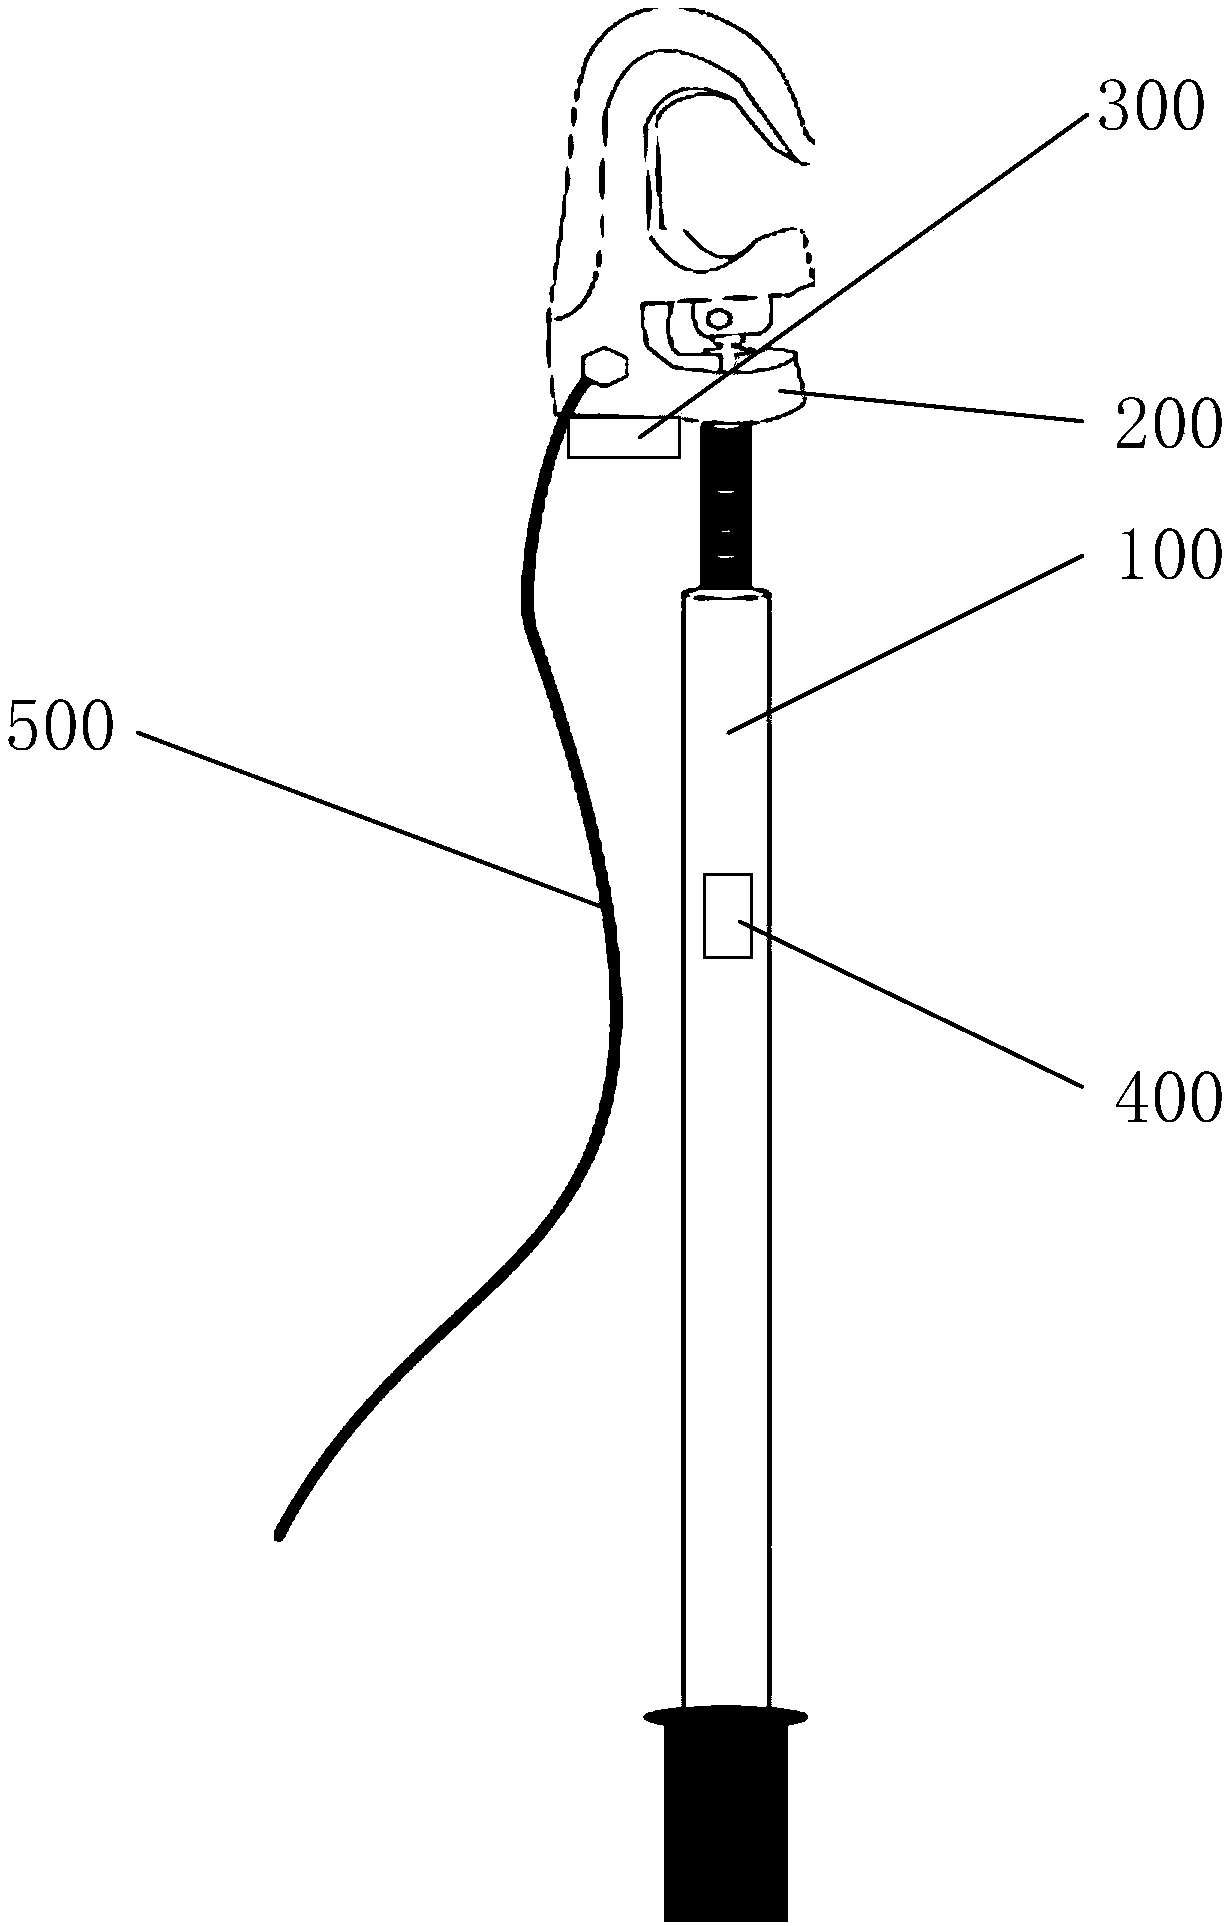 Electricity-testing grounding lead hanger with GPS (Global Position System) function, and grounding measurement device